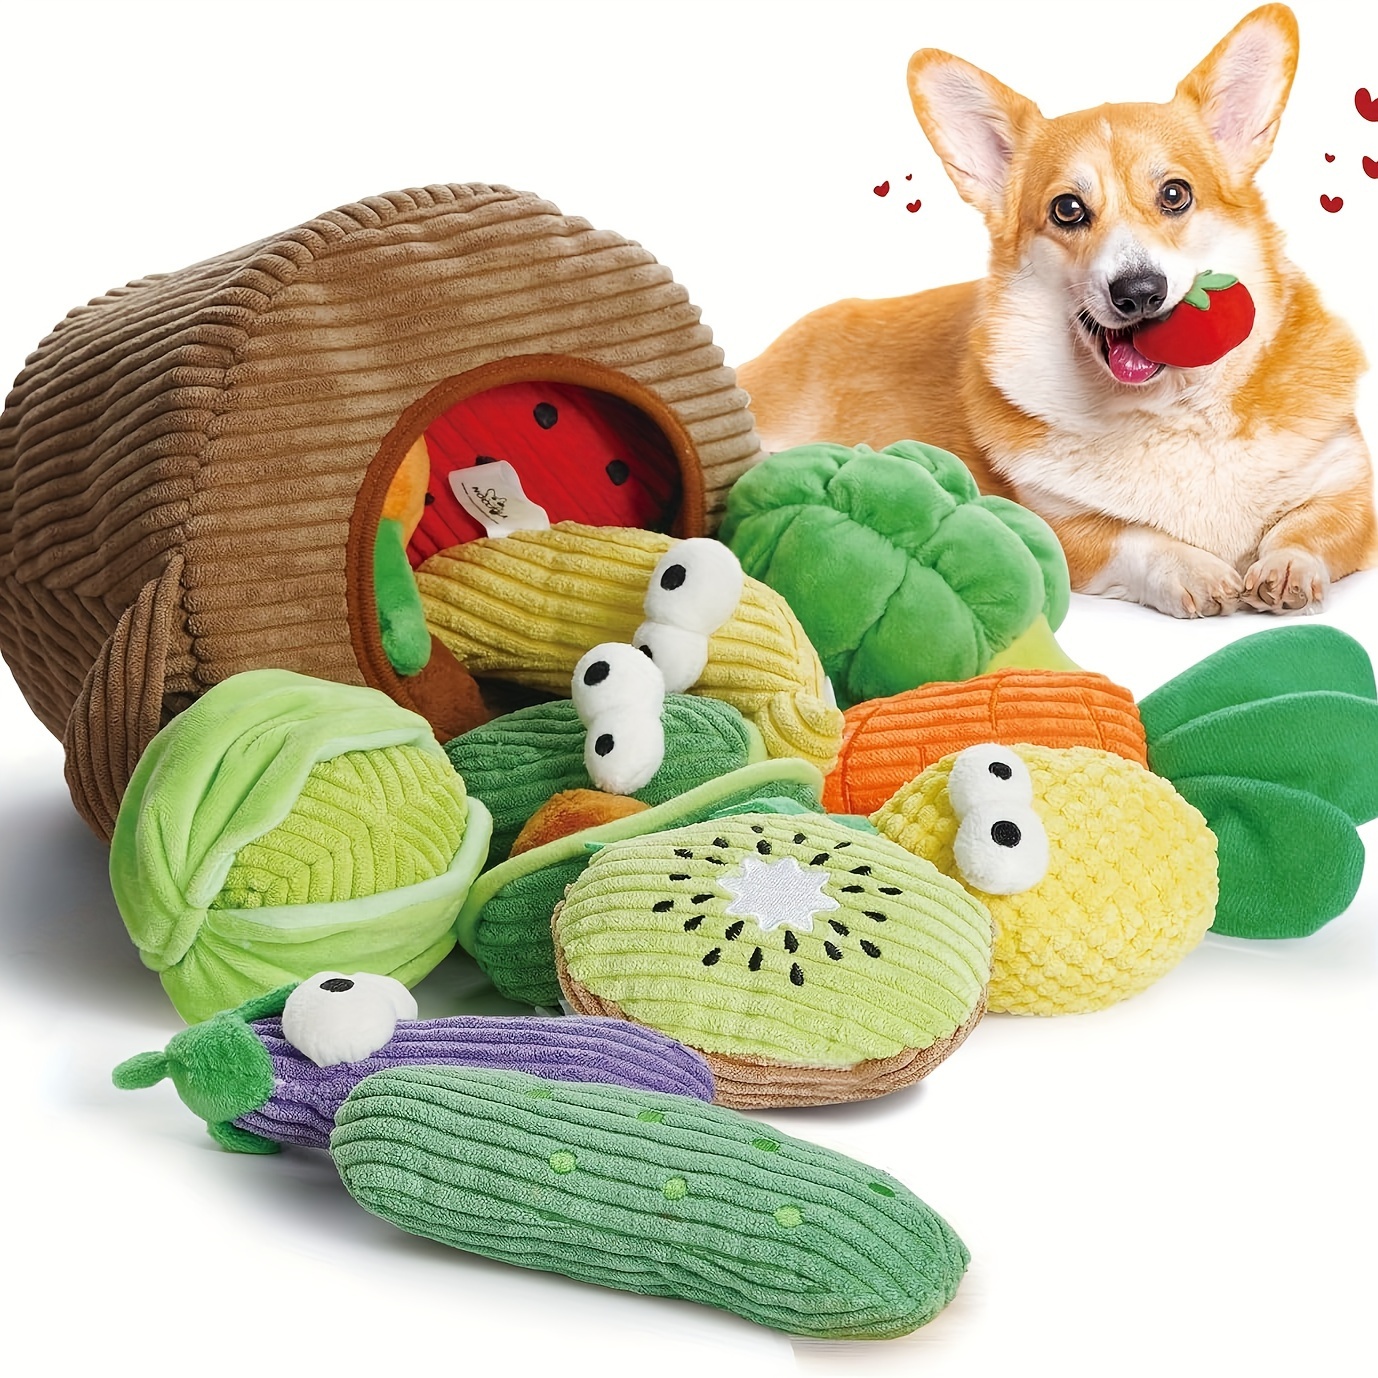 

Nocciola Grocery Bag Dog Toys- 15 Pack Fruits And Veggies Dog Squeaky Toys, Small Dog Toys For Aggressive Chewers, Durable Plush Dog Toys For Small Medium Size Dogs, Puppy Dog Toys To Keep Them Busy